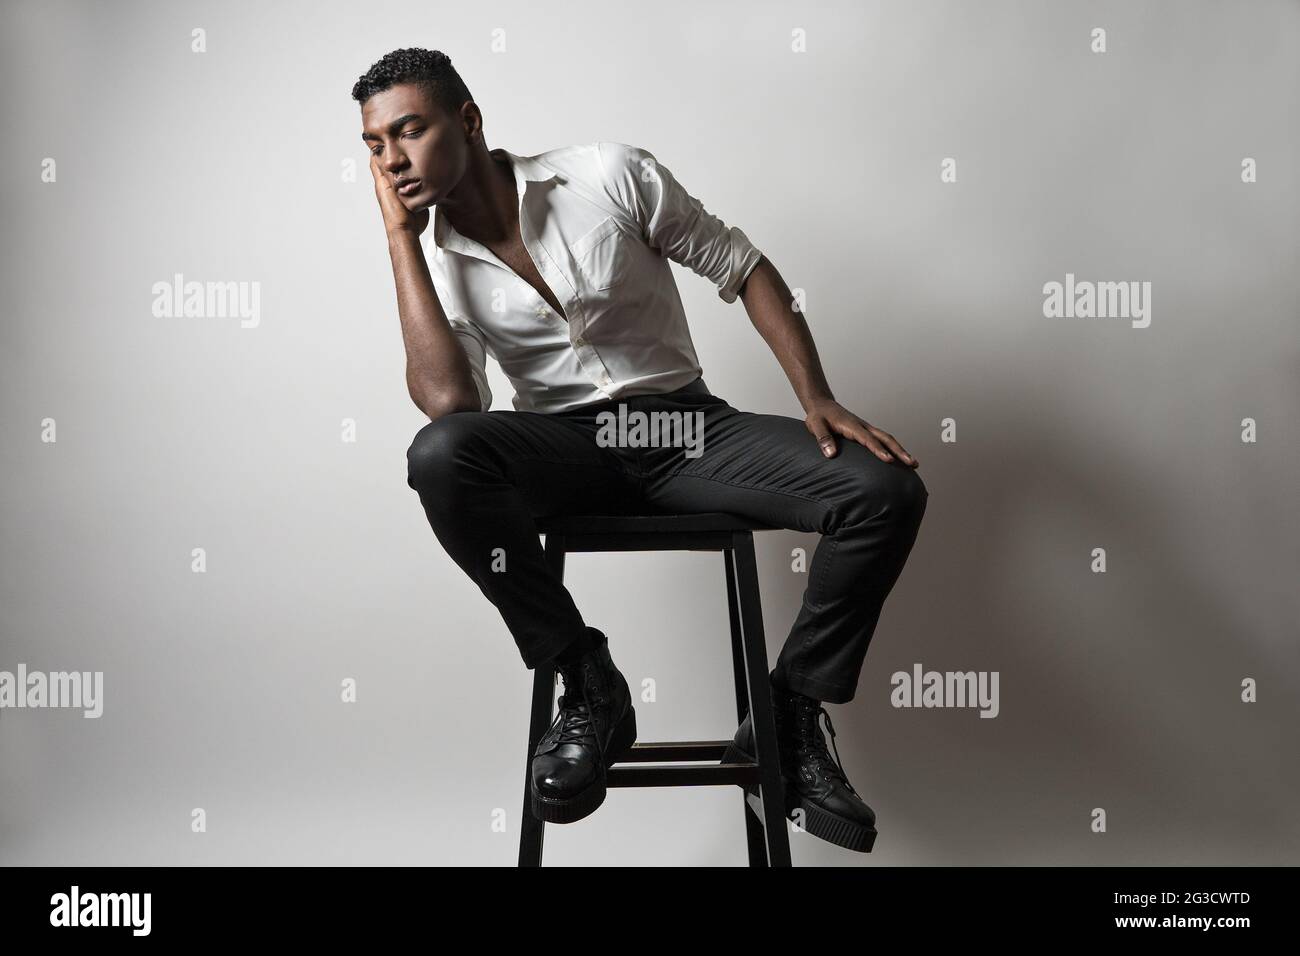 A young black male, fashion model, sitting on a wooden stool leaning with closed eyes, relaxed and thinking. An artistic portrait. Stock Photo